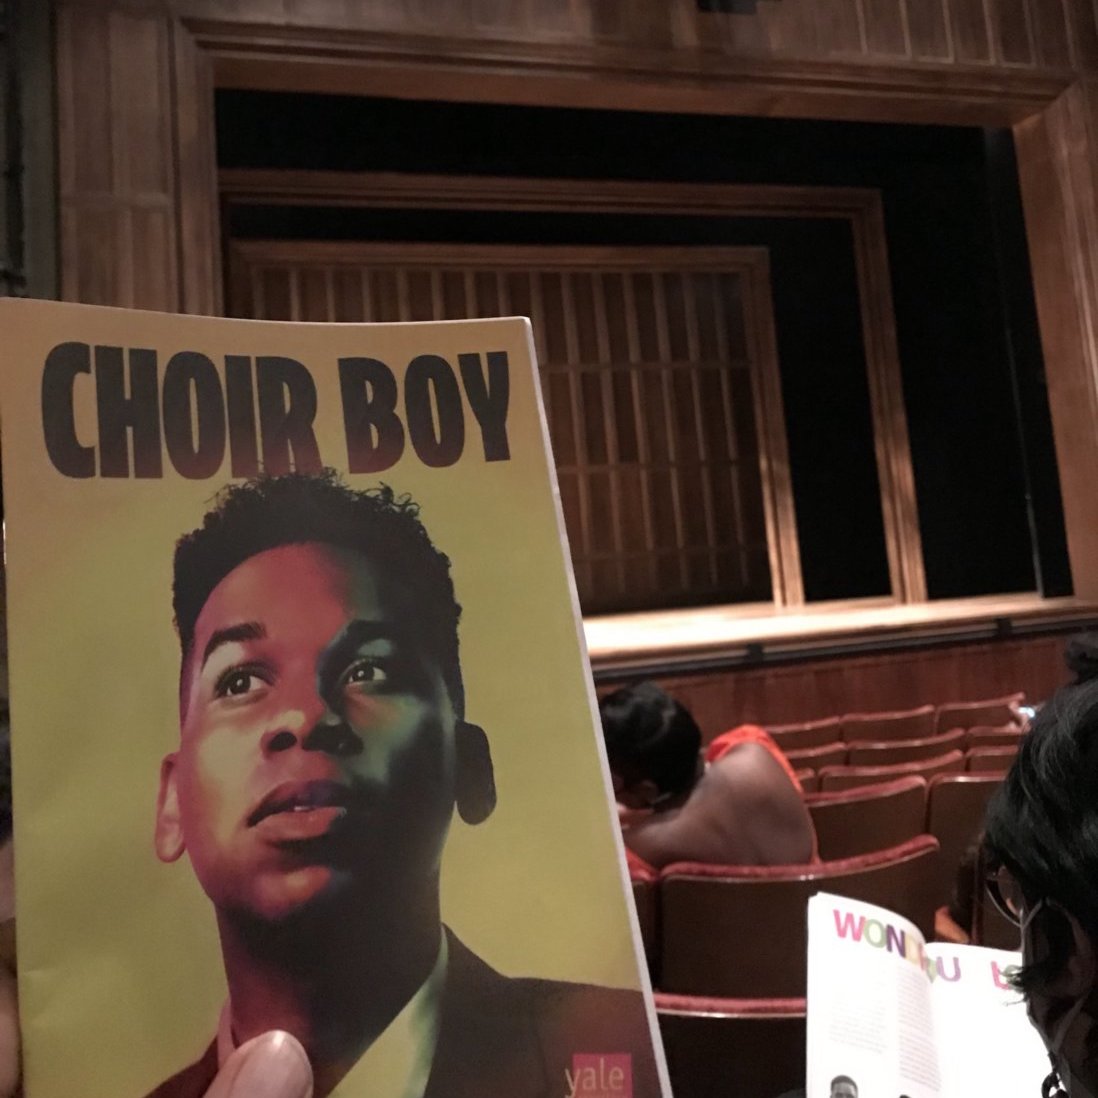 Image of playbill for Choir Boy at the Yale Rep Theater